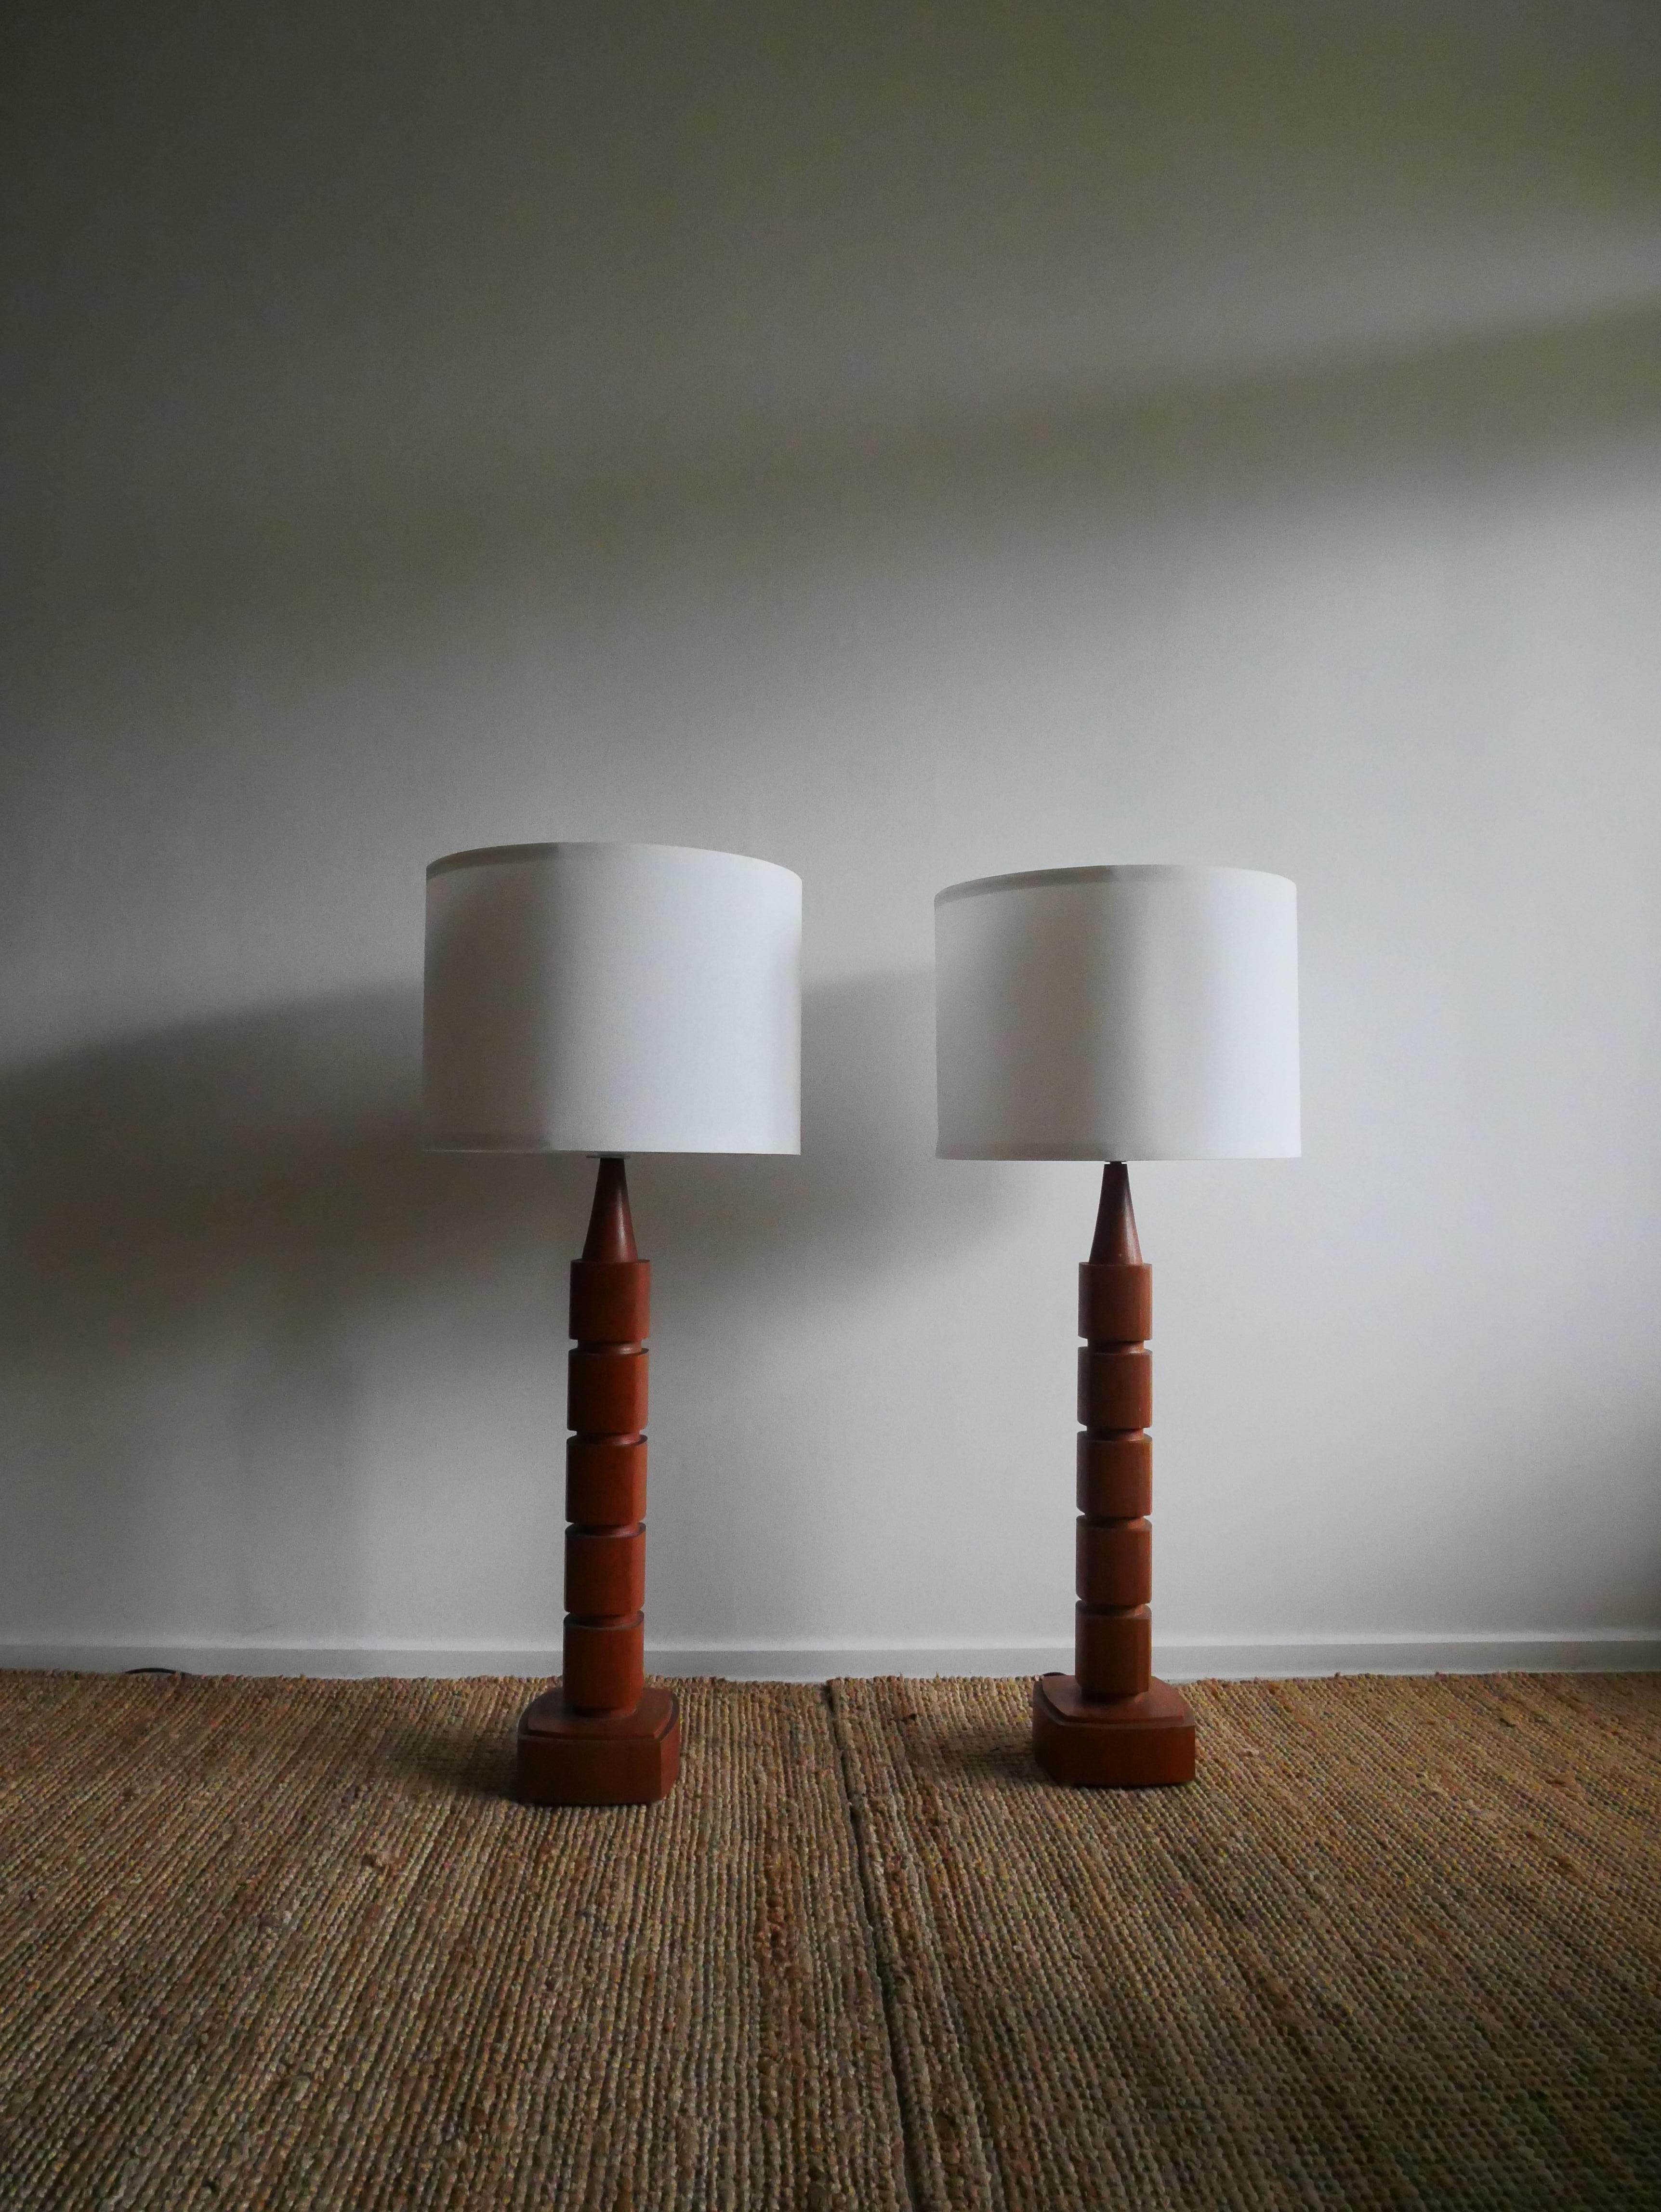 A Pair of Möllers Armatur Eskilstuna Floor Lamps.

Big brutalistic side table/ floor lamps, made in the 1970.

The red-brown tones of the teak wood makes a soft glow.

Height: 78 cm without lamp shade.